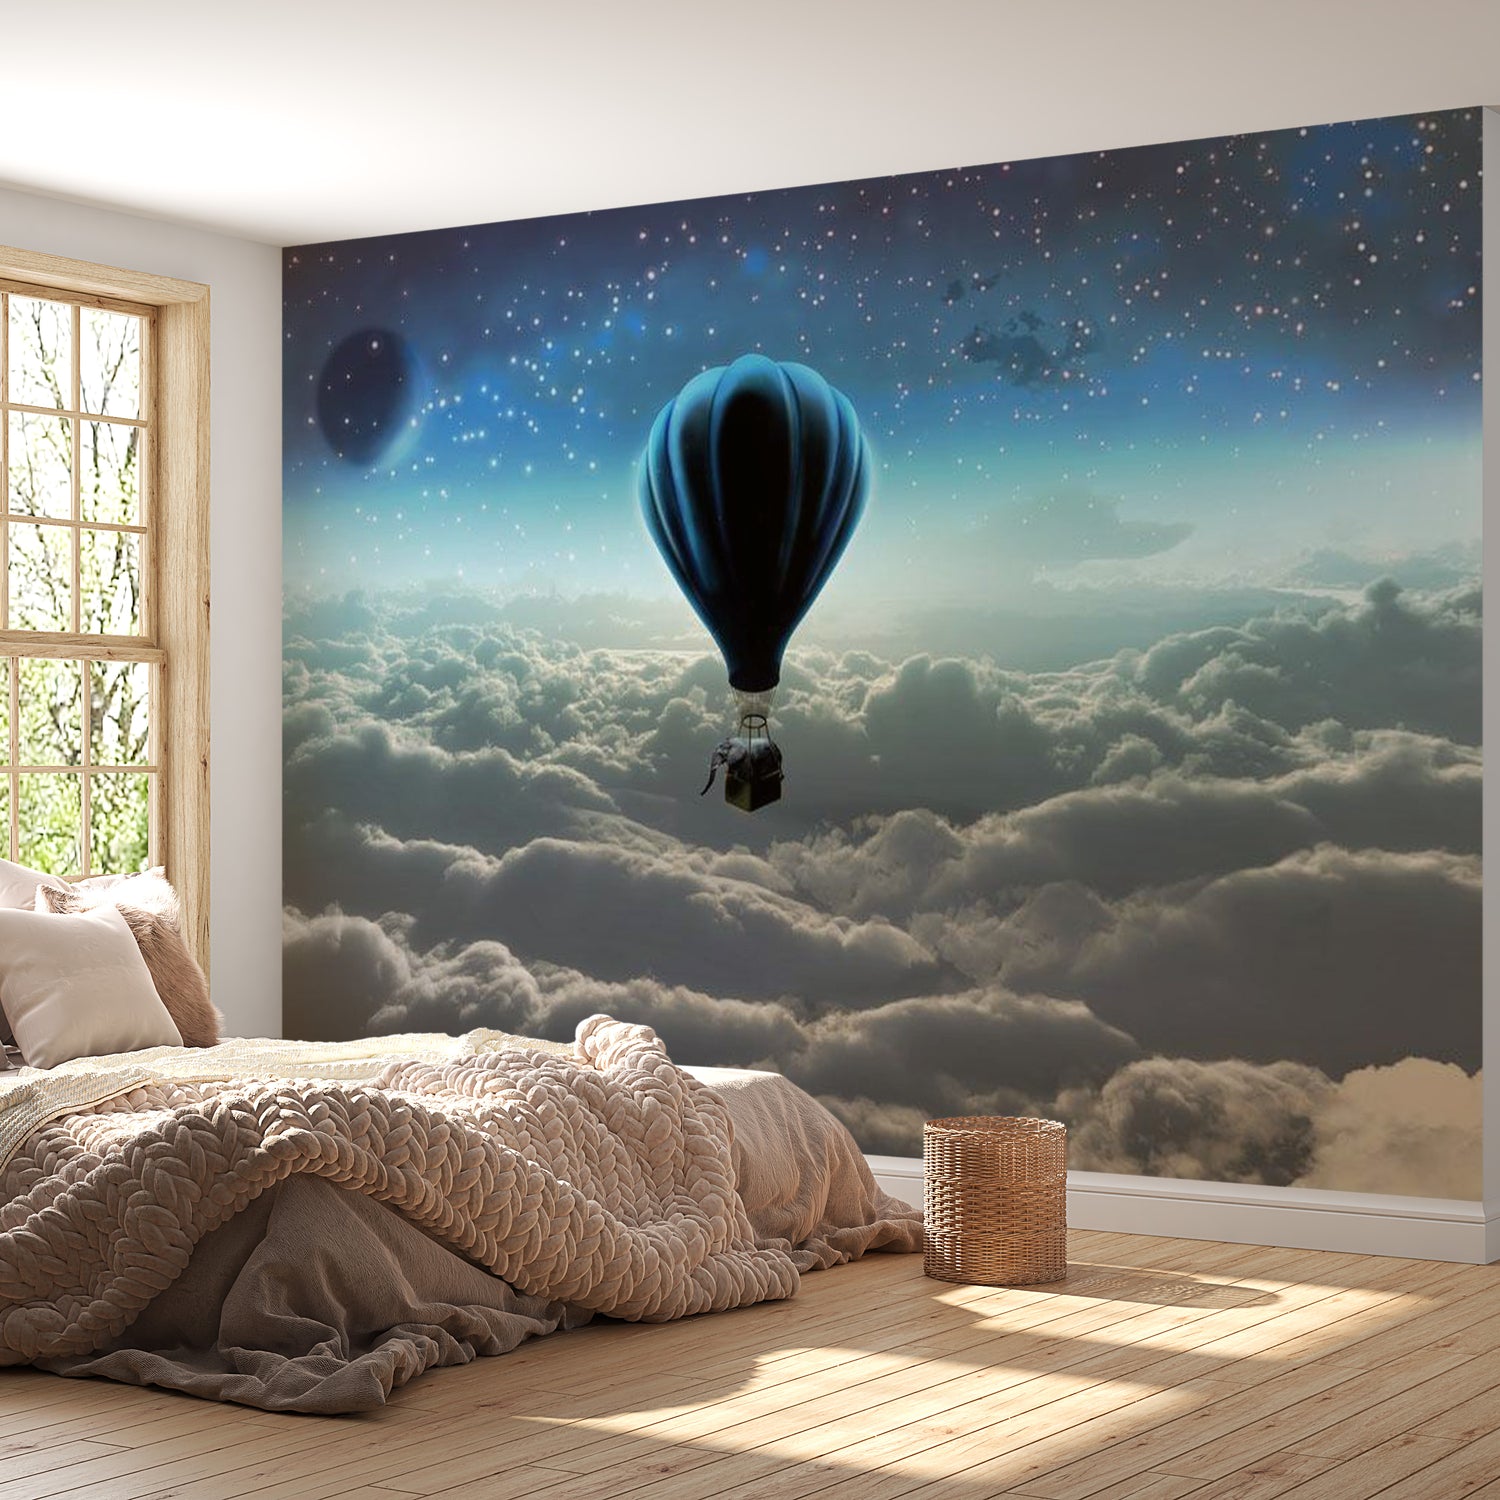 Peel & Stick Space Wall Mural - Night Expedition - Removable Wall Decals